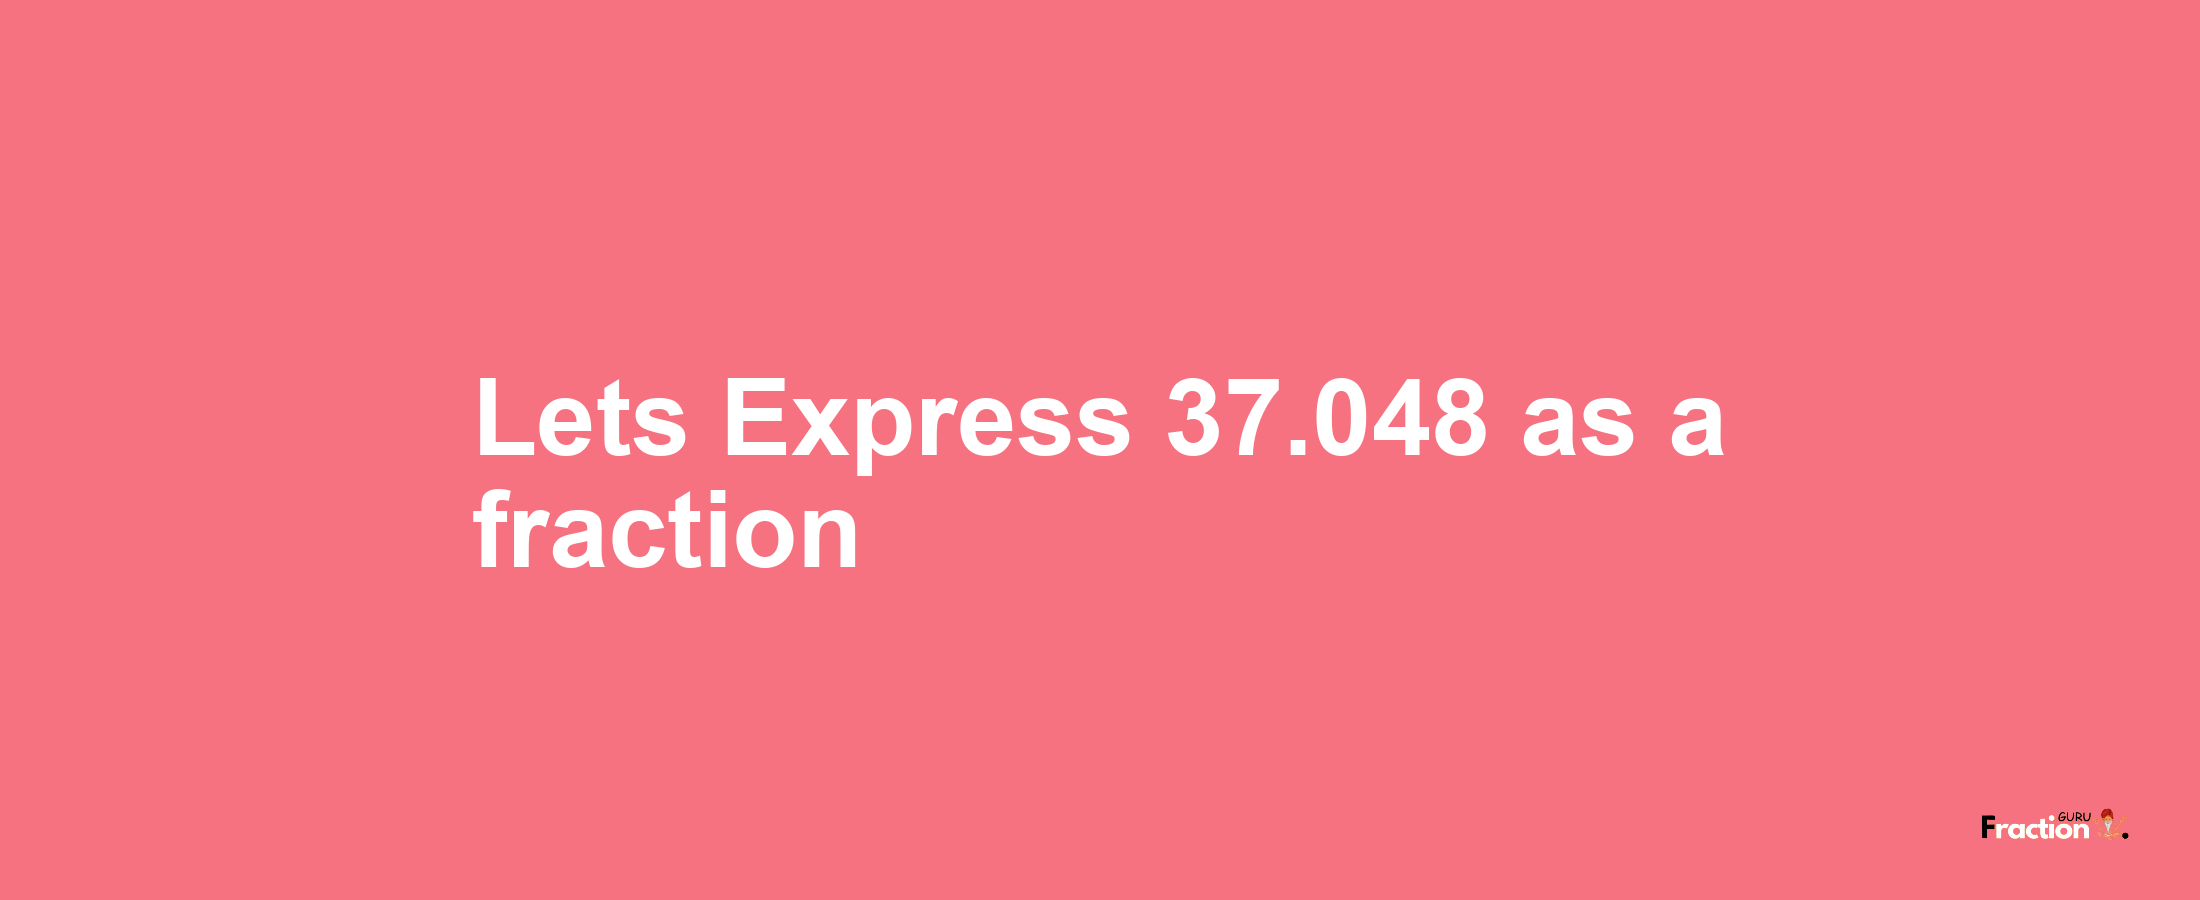 Lets Express 37.048 as afraction